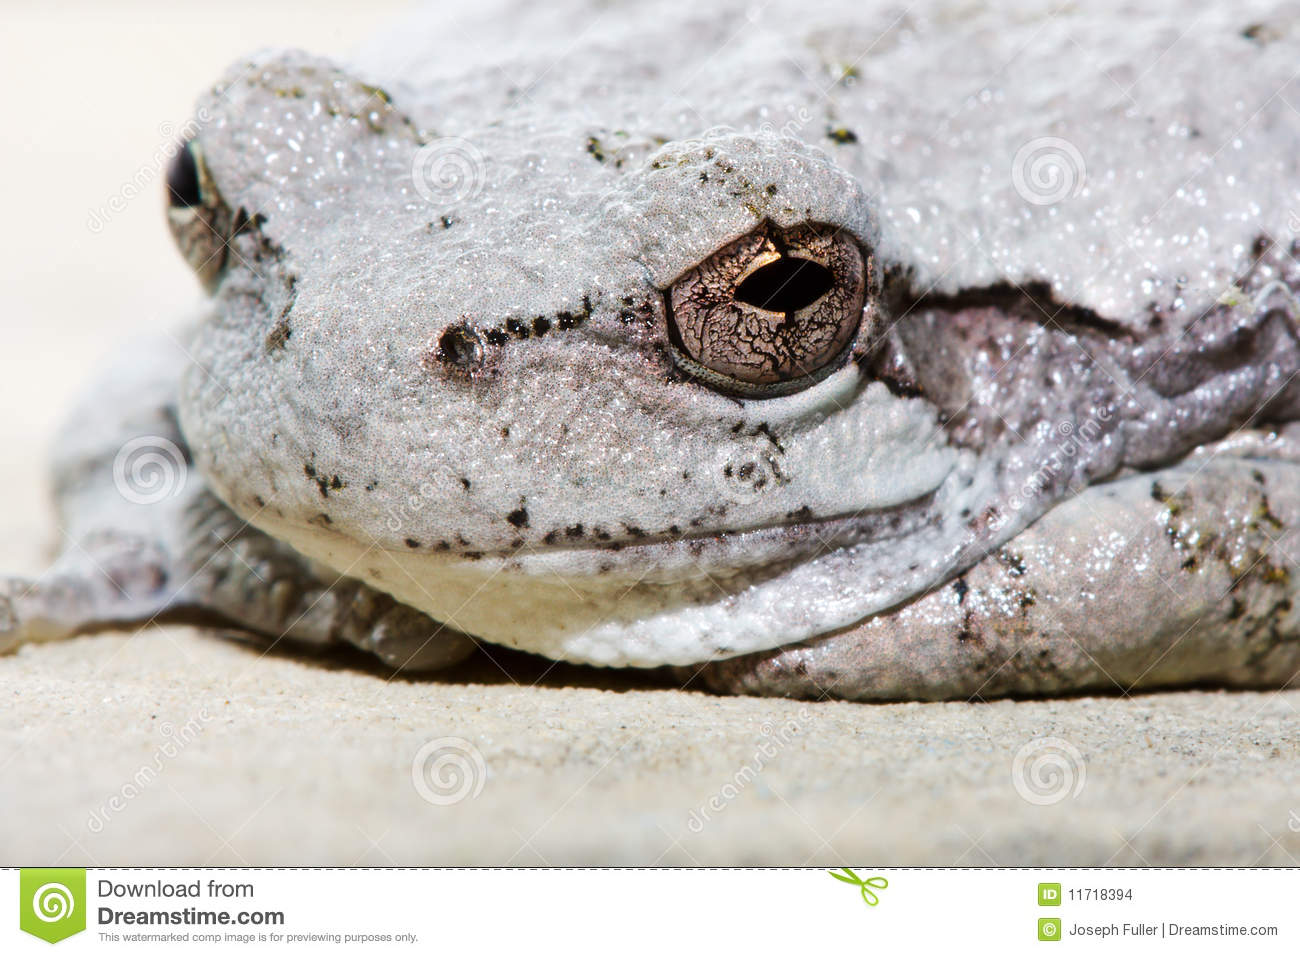 Cope S Gray Tree Frog  Stock Images   Image  11718394